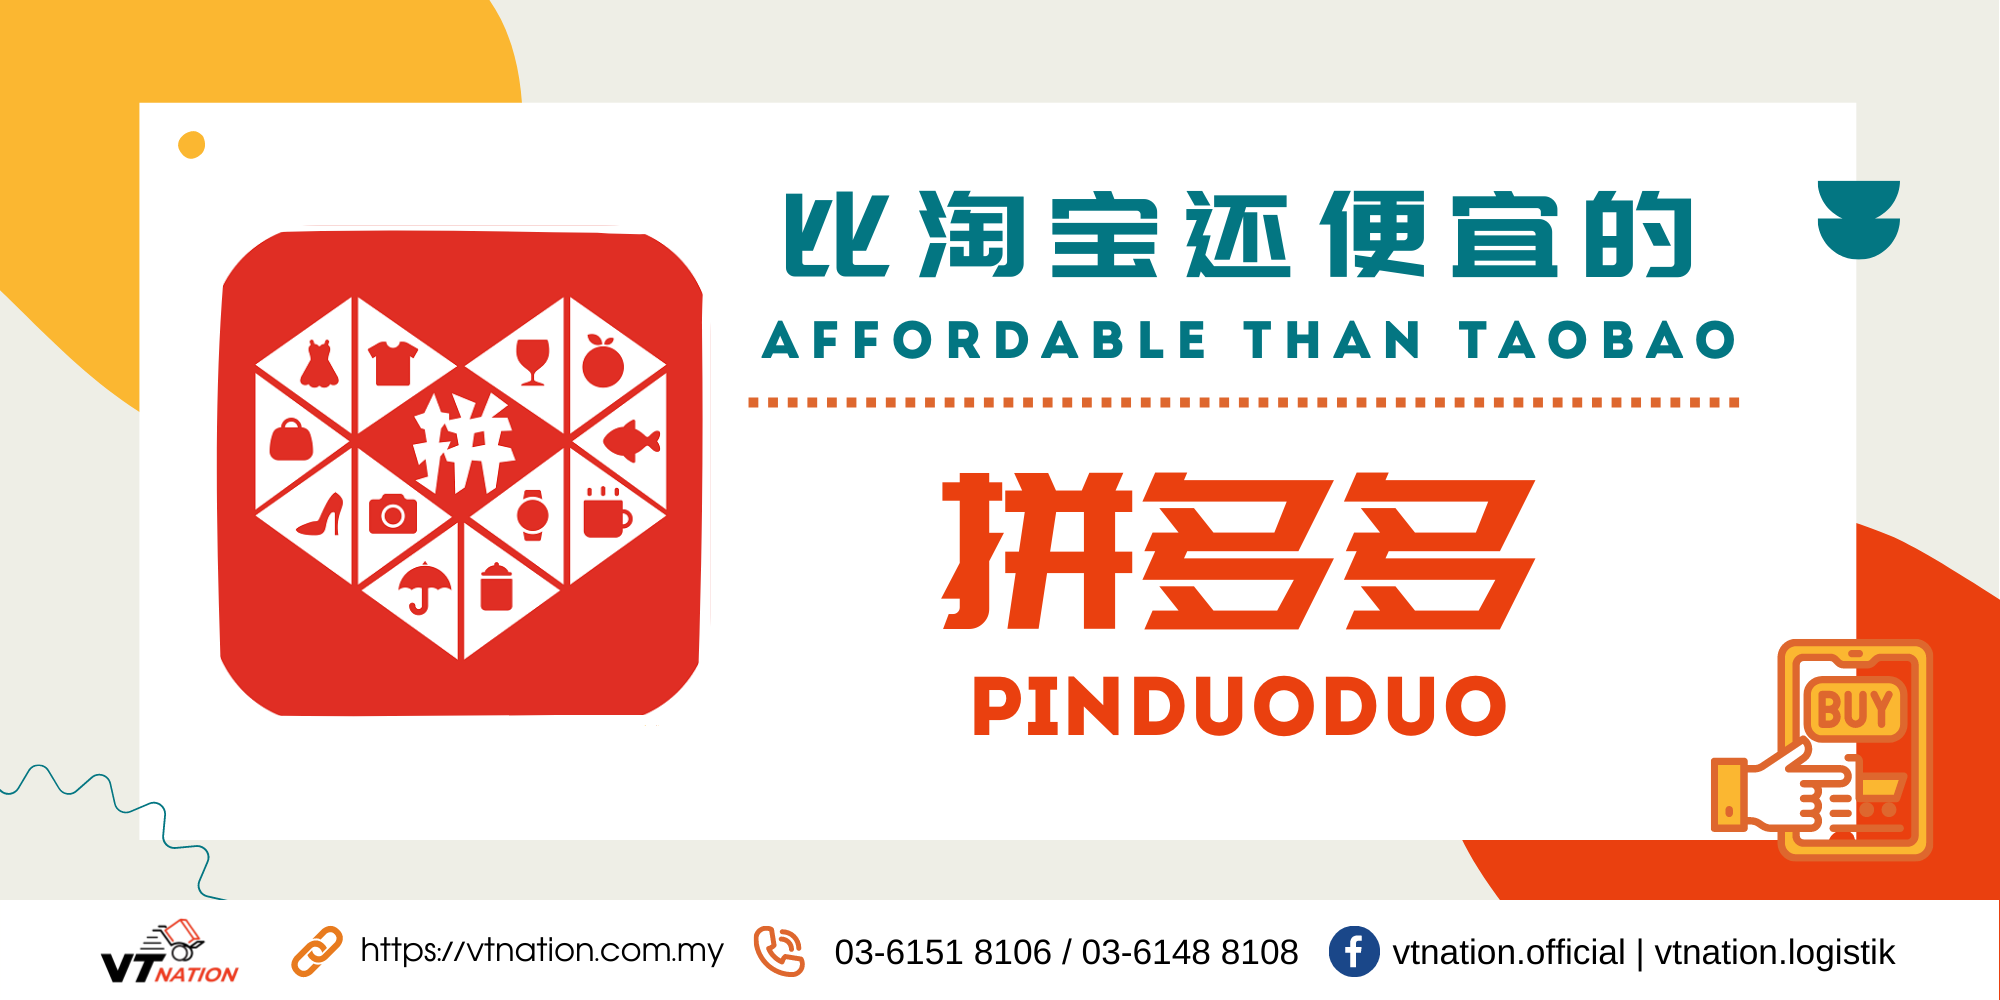 PinDuoDuo is more affordable than Taobao?!